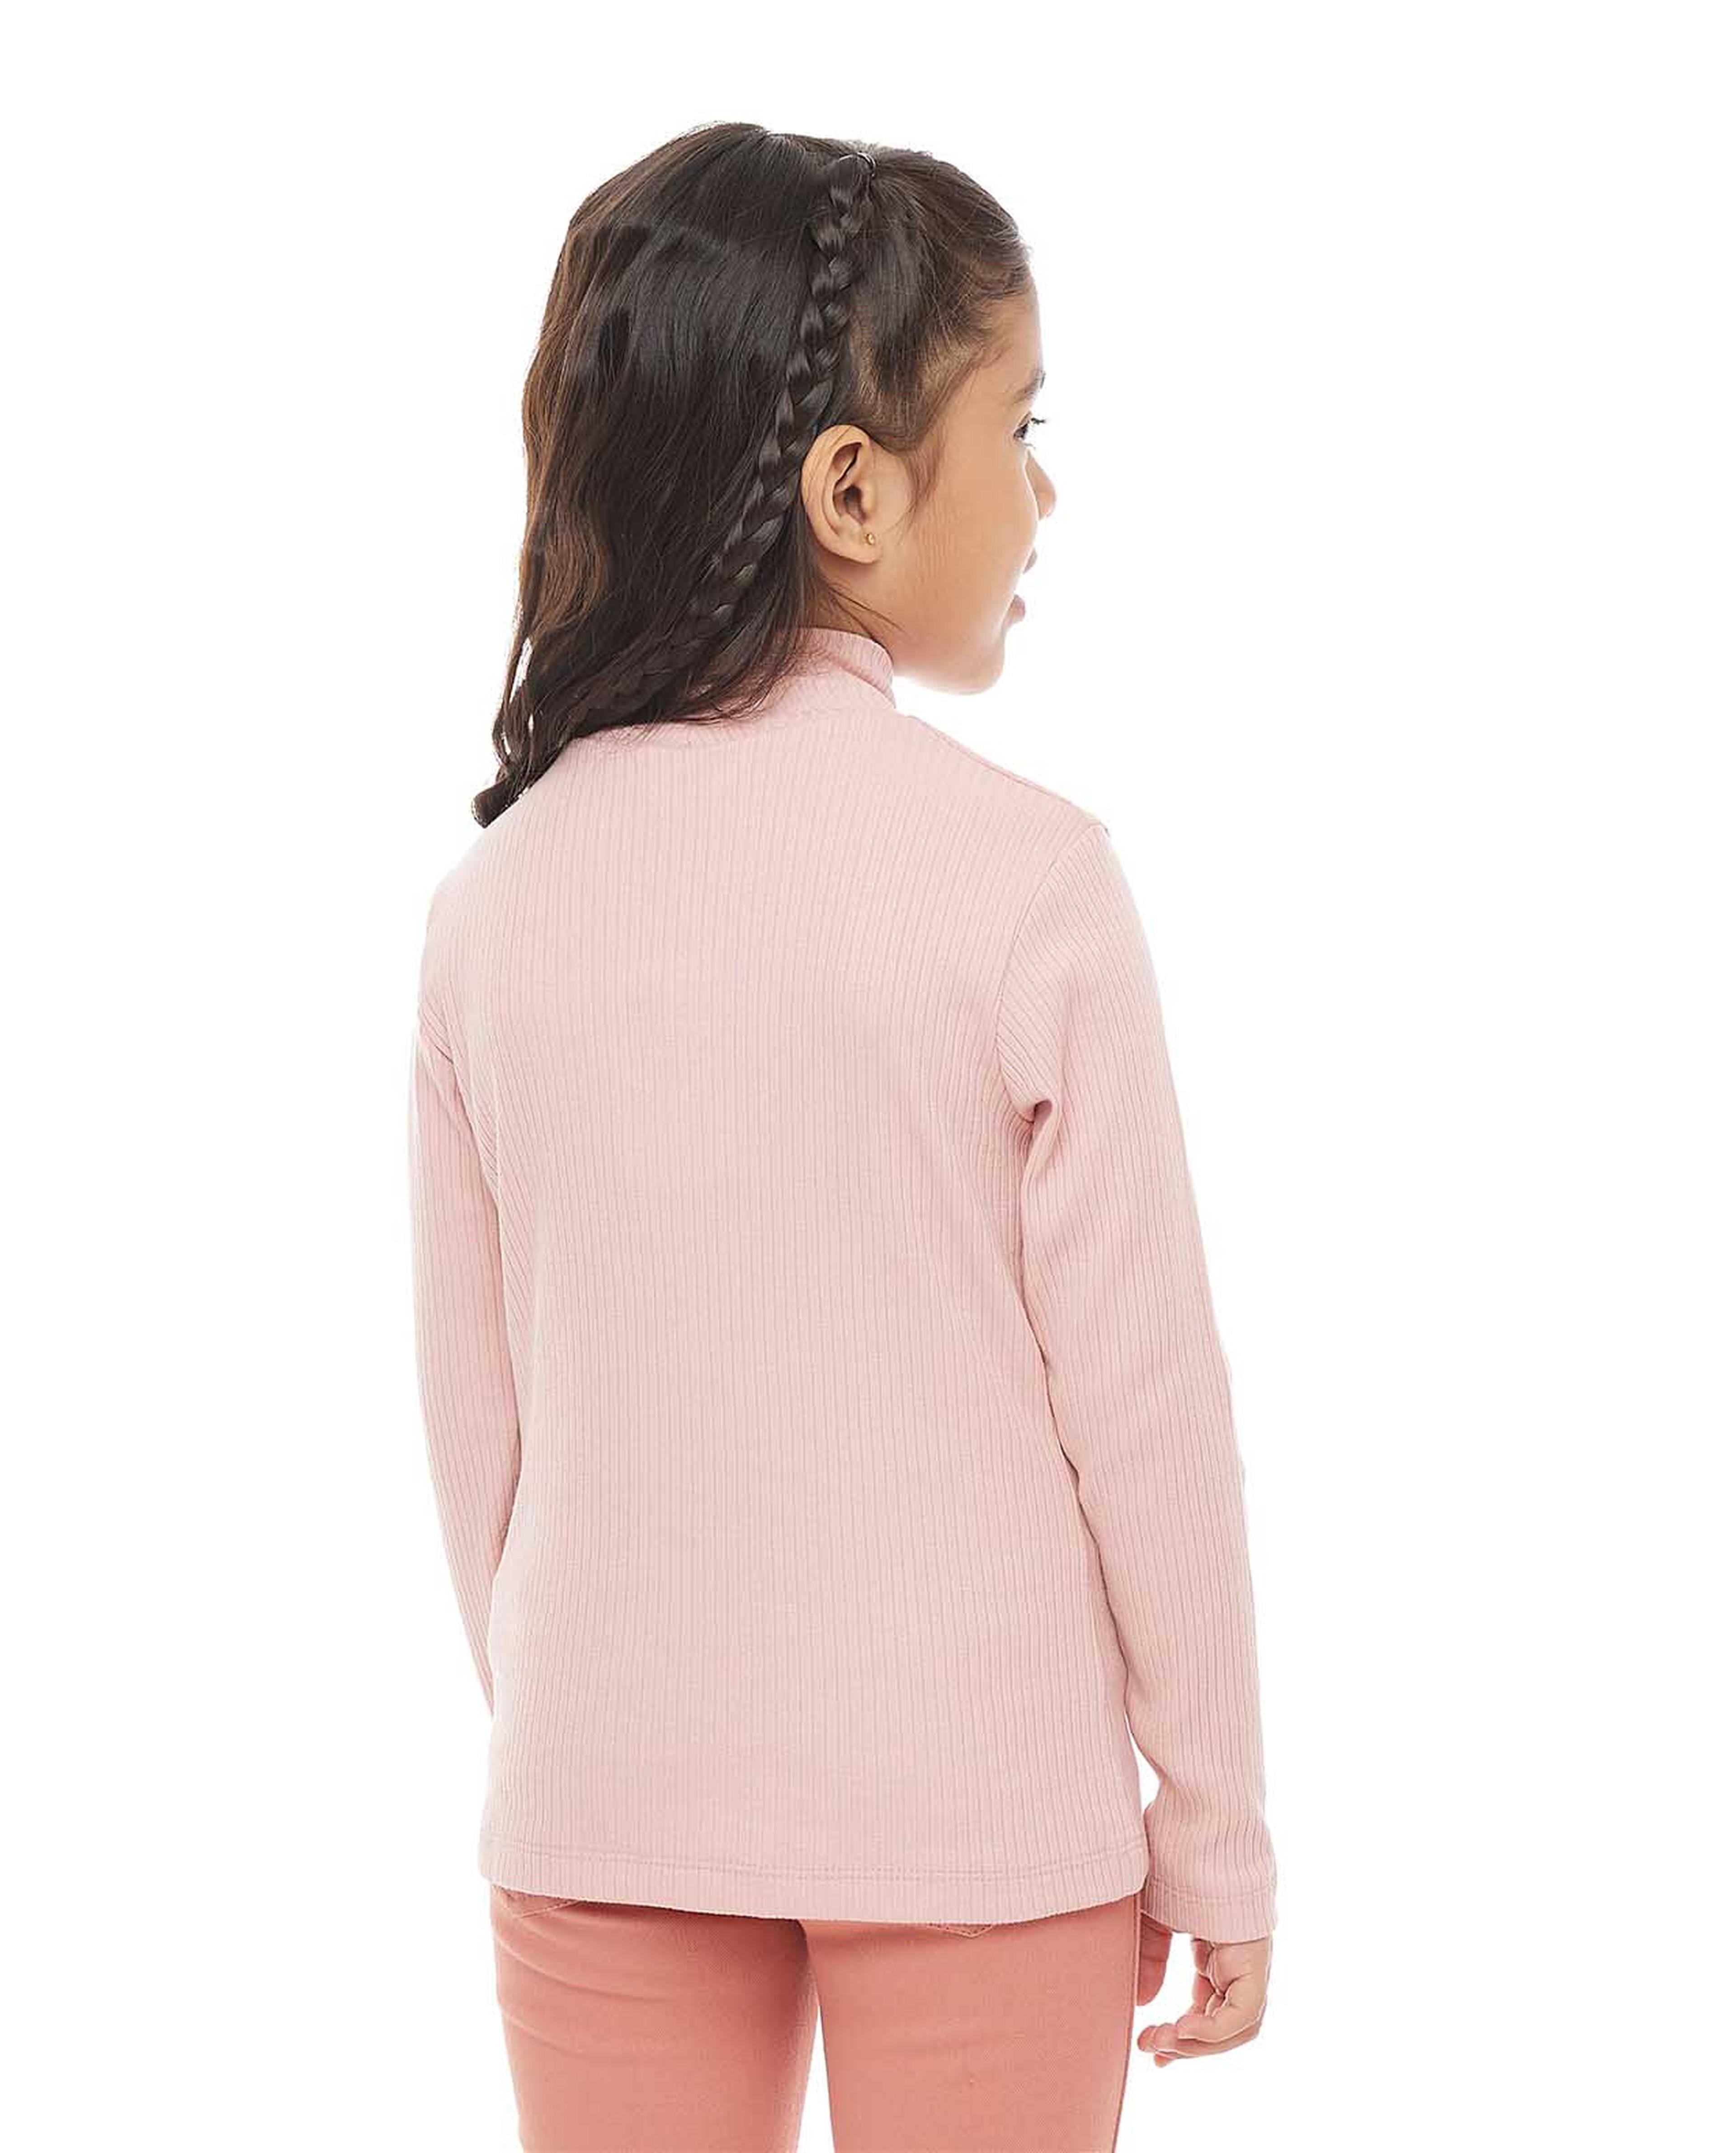 Ribbed Top with High Neck and Long Sleeves